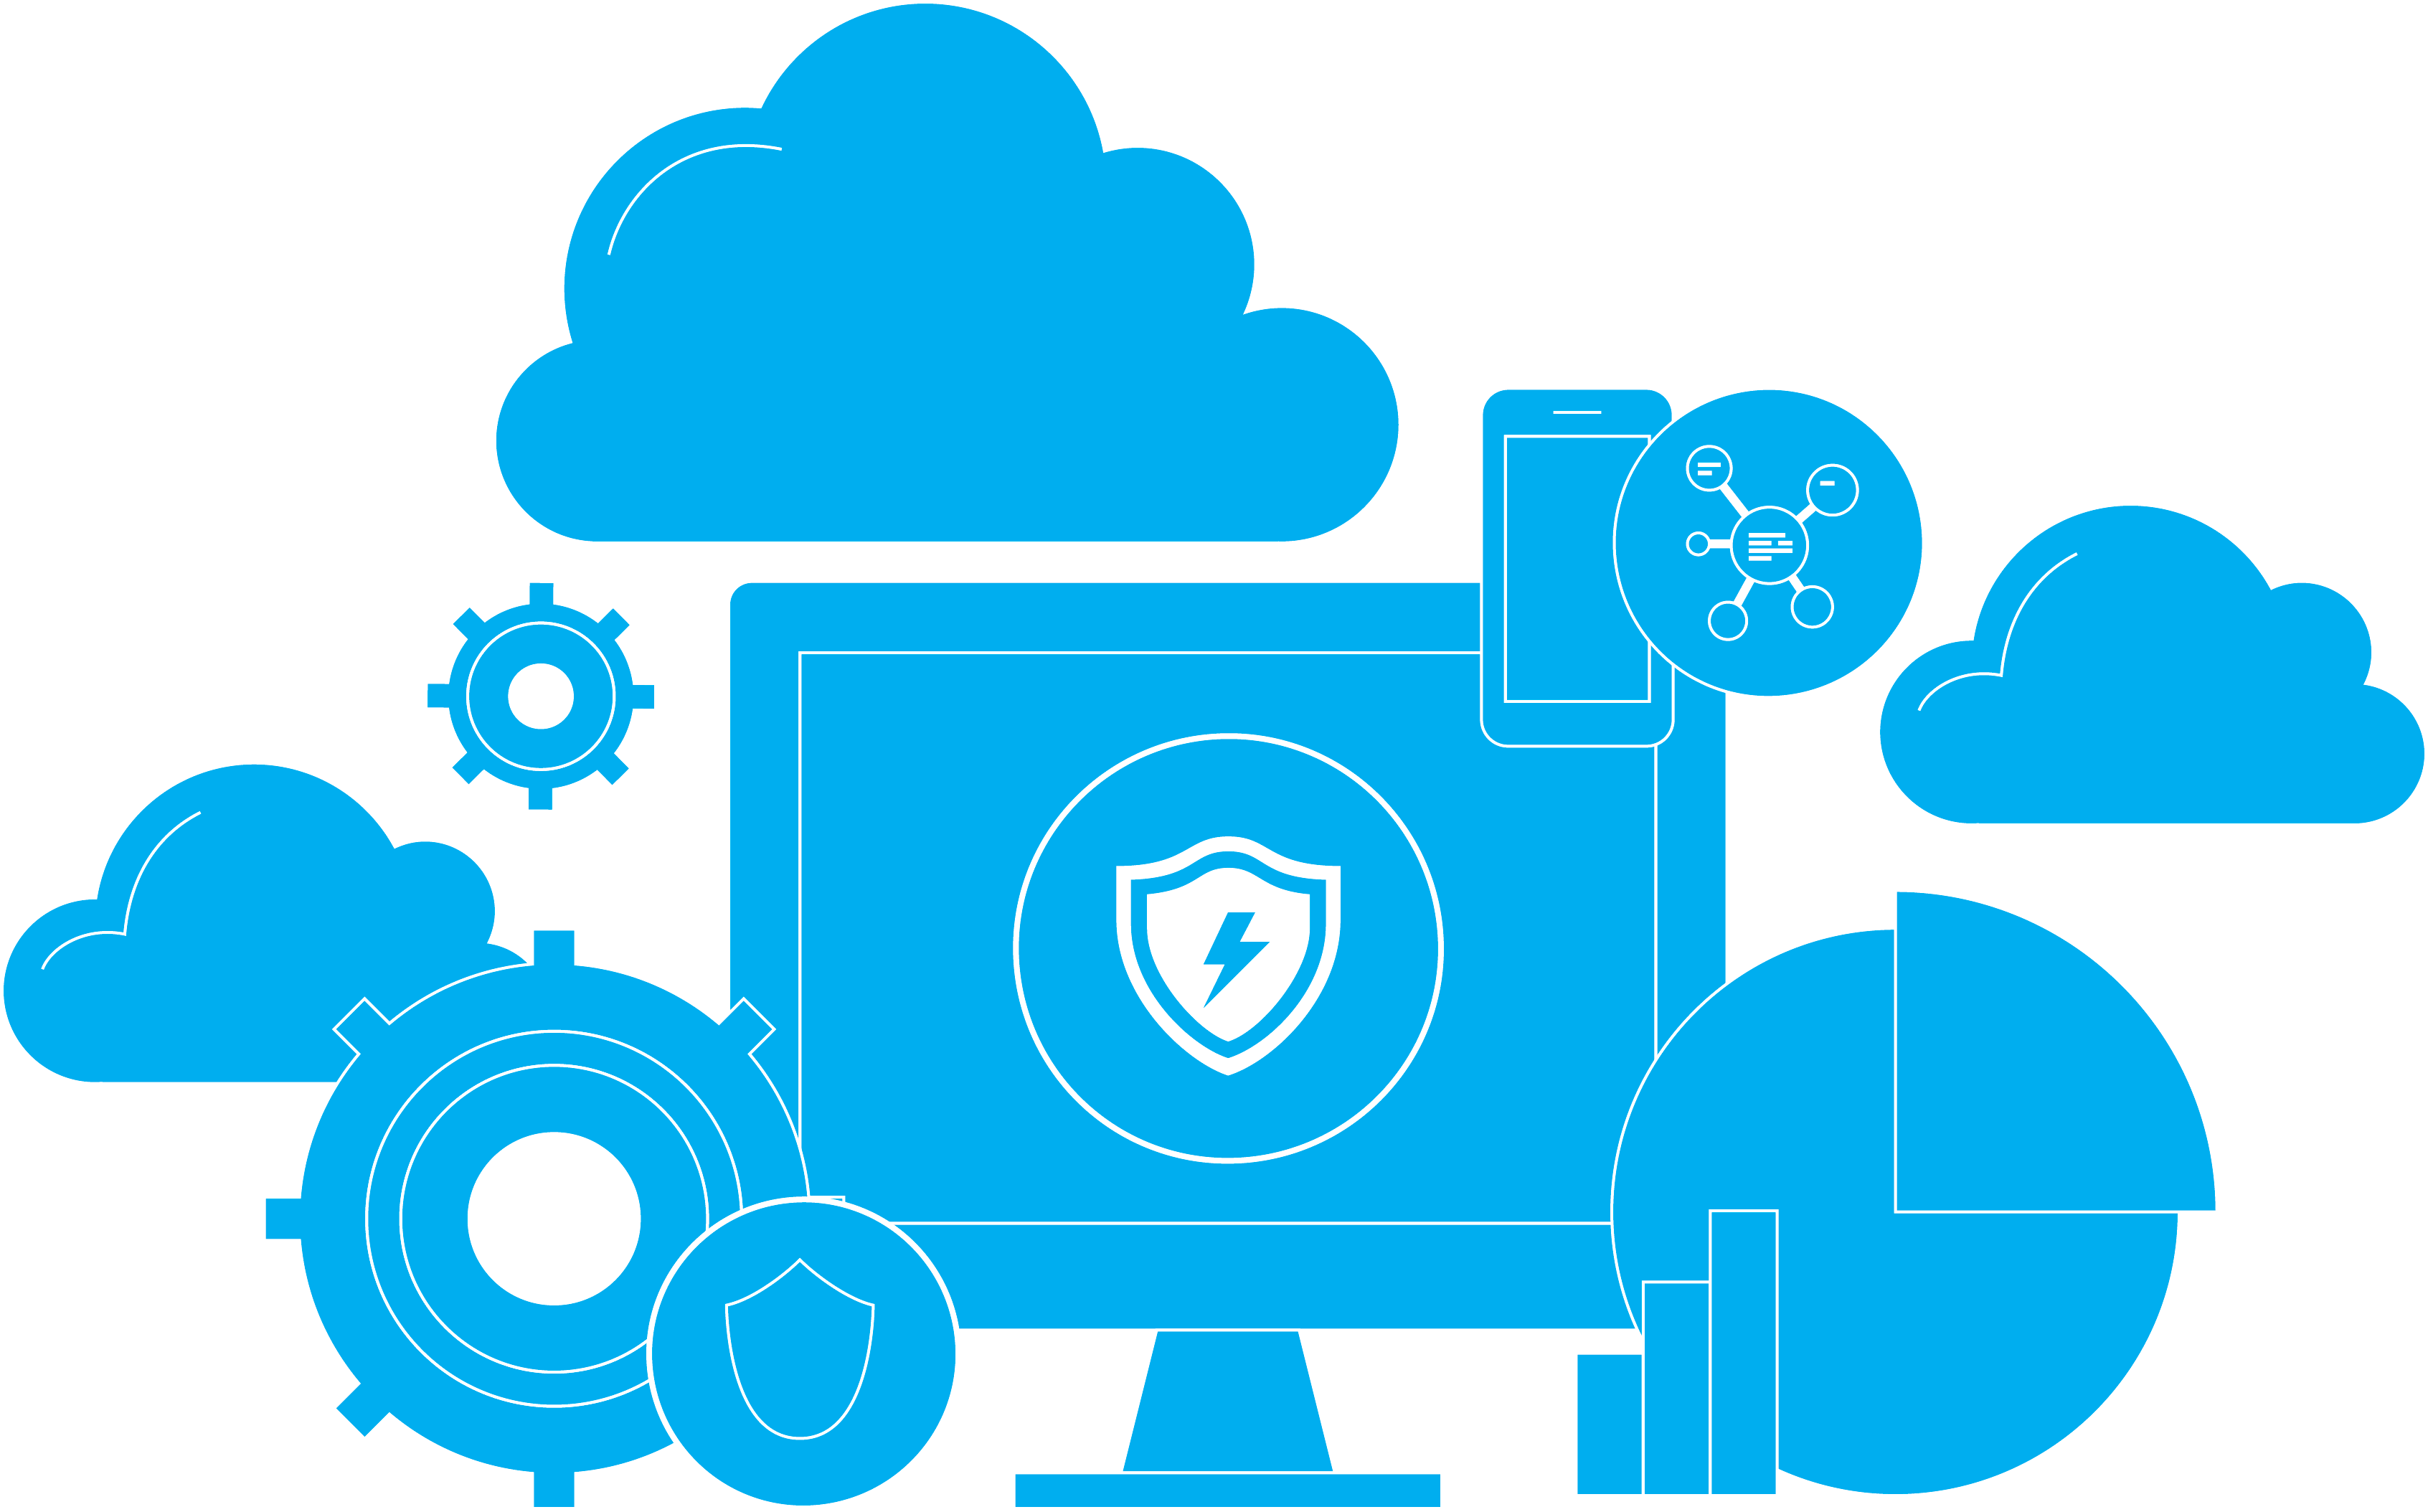 Microsoft 365 Defender helps protect your organization against advanced attacks across your endpoints, identities, email, and applications